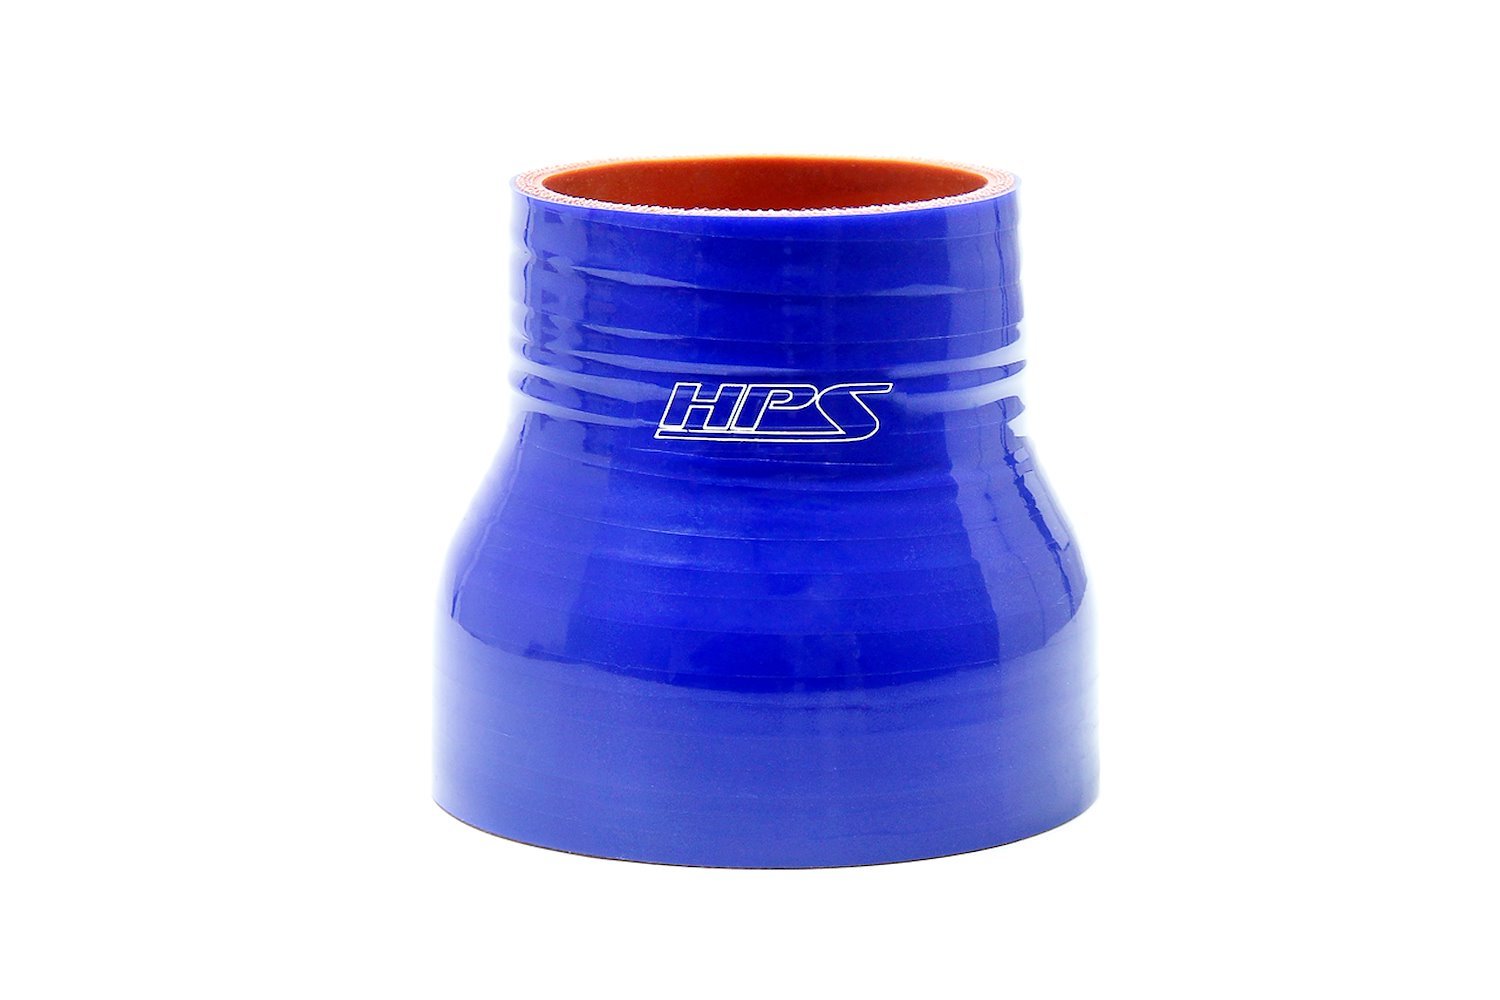 HTSR-200-250-L6-BLUE Silicone Reducer Hose, High-Temp 4-Ply Reinforced, 2 in. - 2-1/2 in. ID, 6 in. Long, Blue